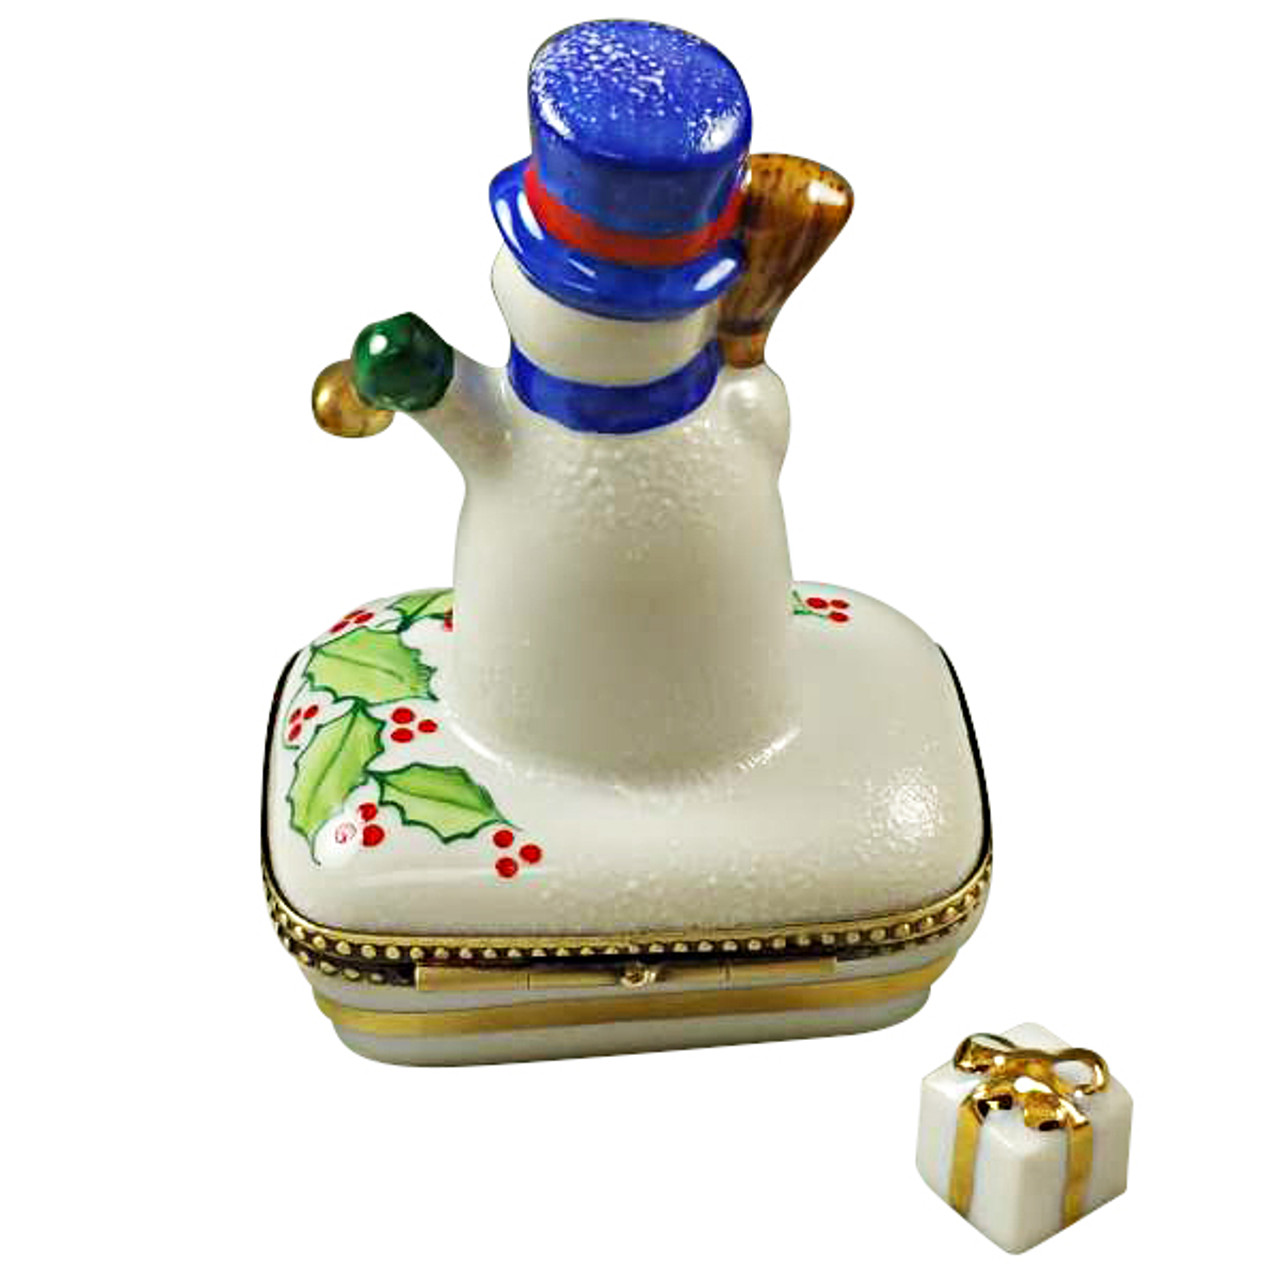 Snowman With Blue Scarf Rochard Limoges Box